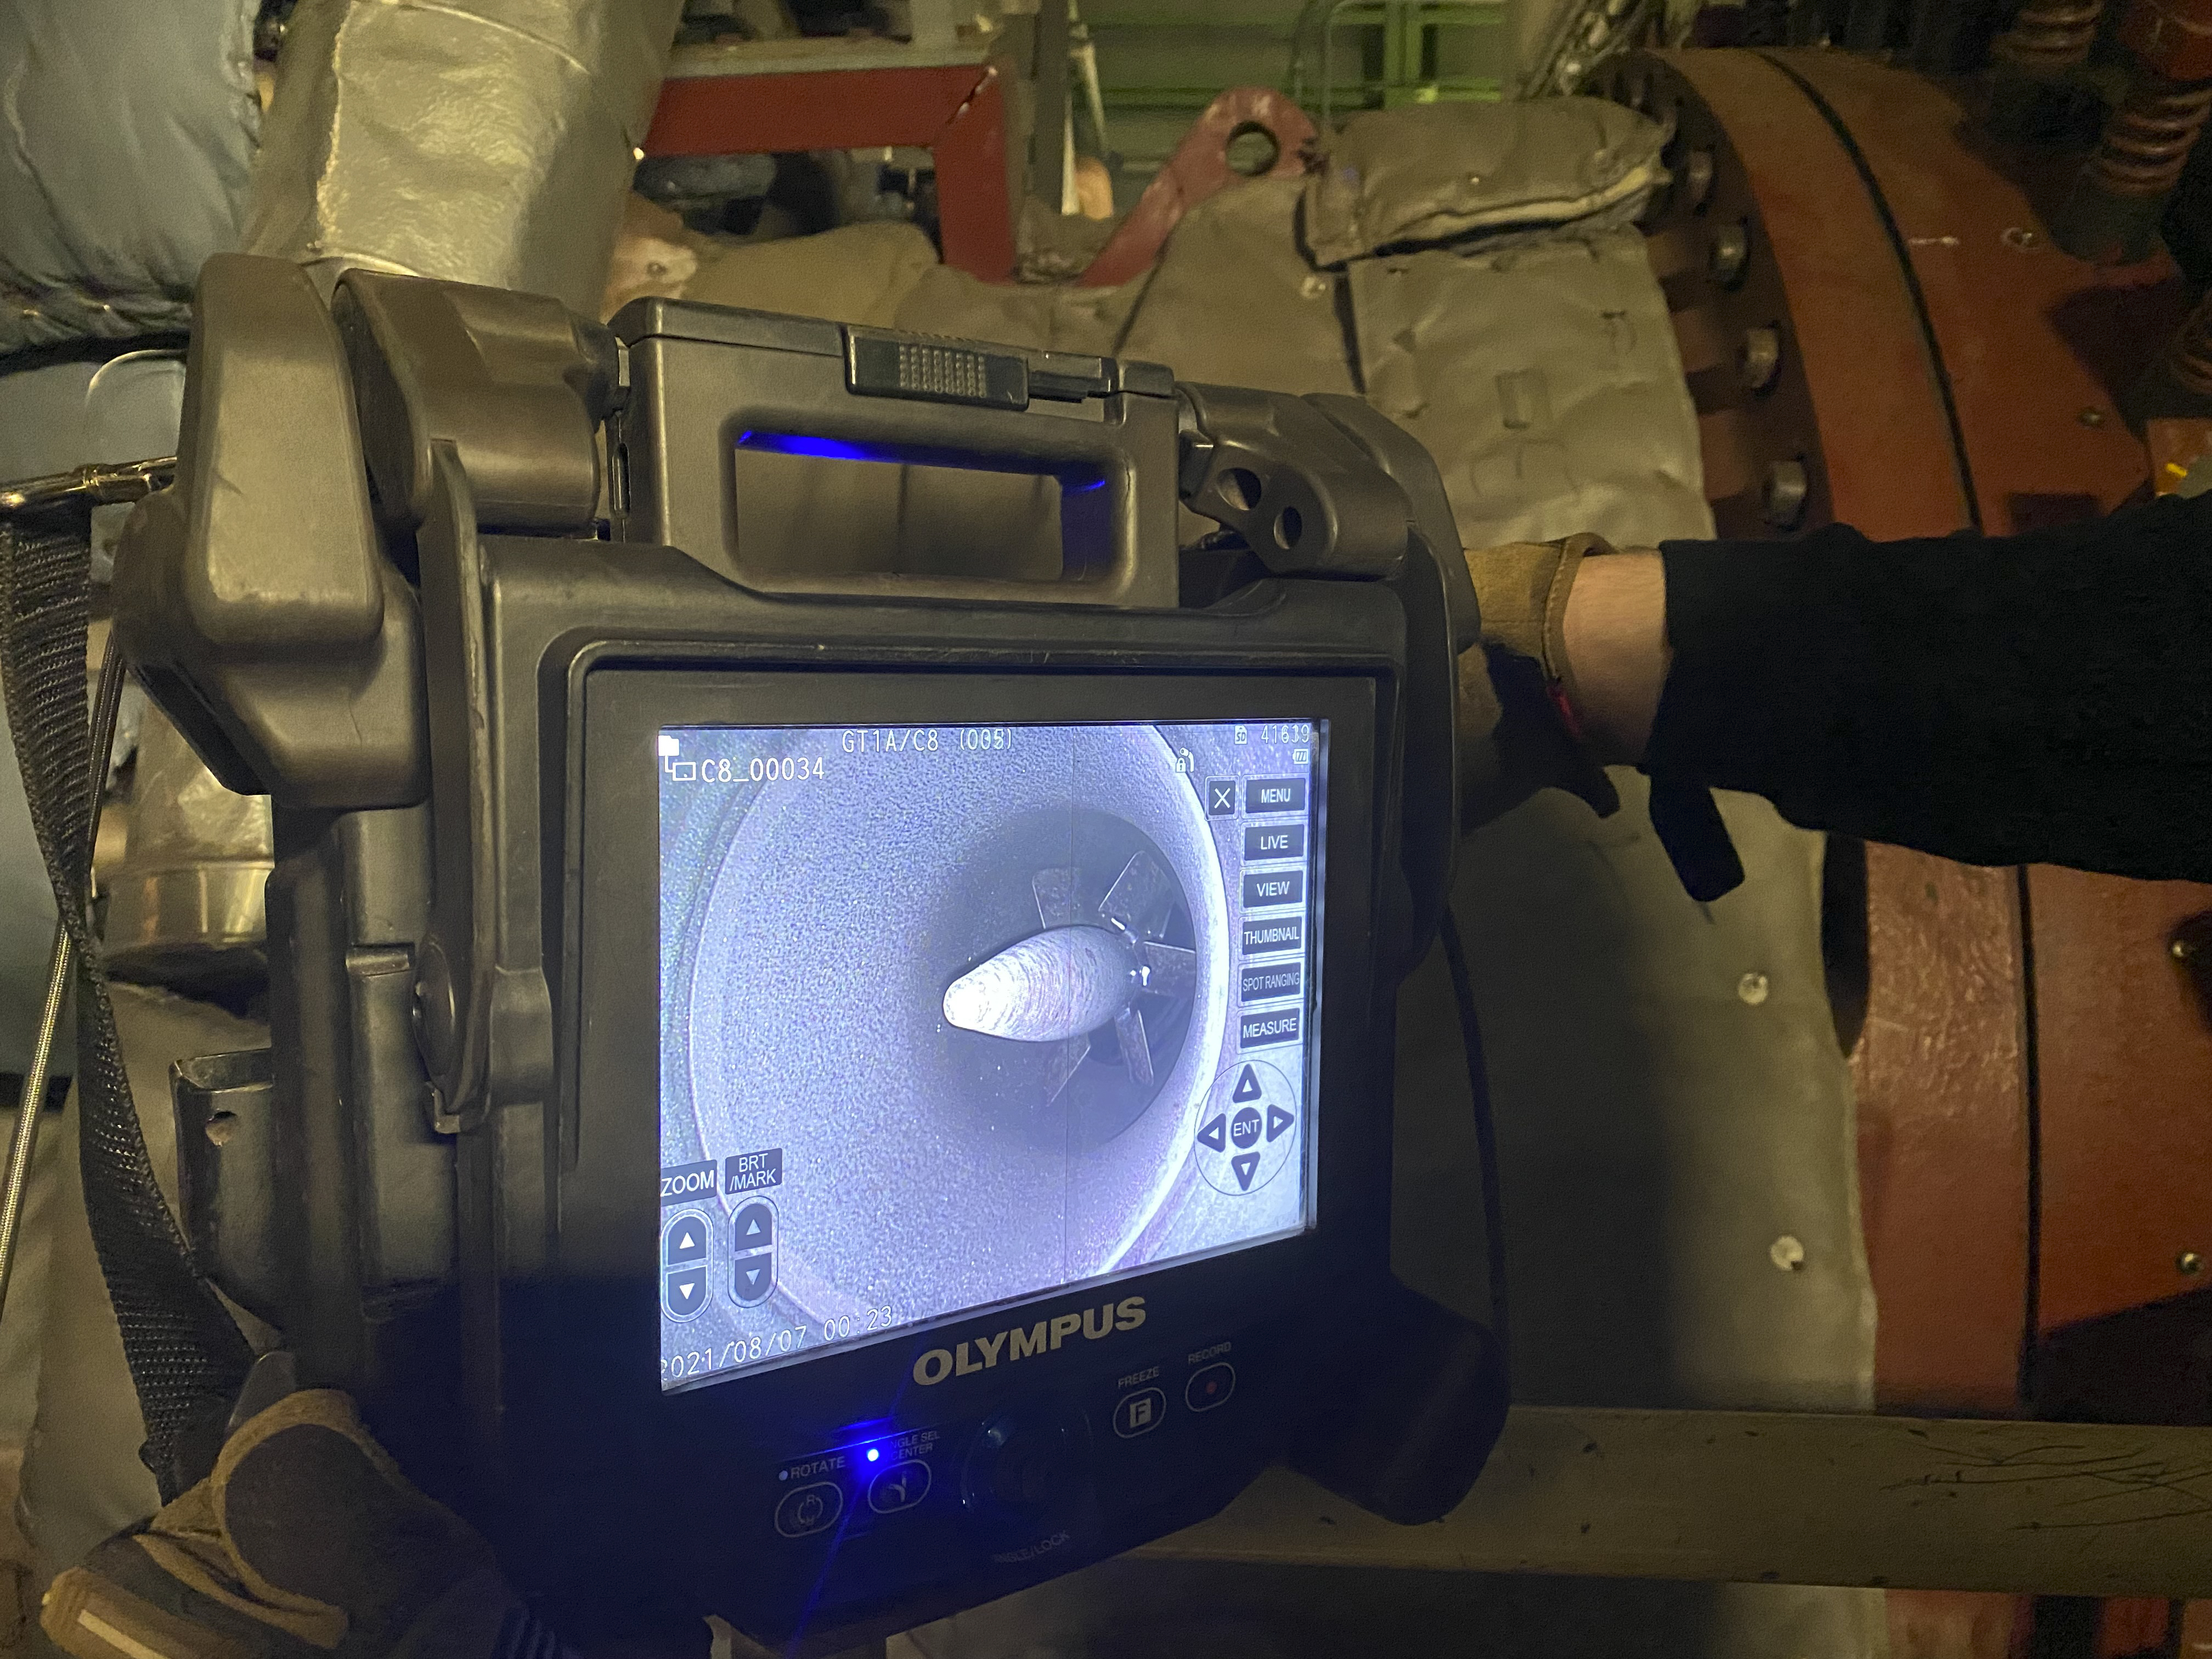 IPLEX NX videoscope’s large screen and bright, vibrant imaging showing the inside of a power plant turbine .